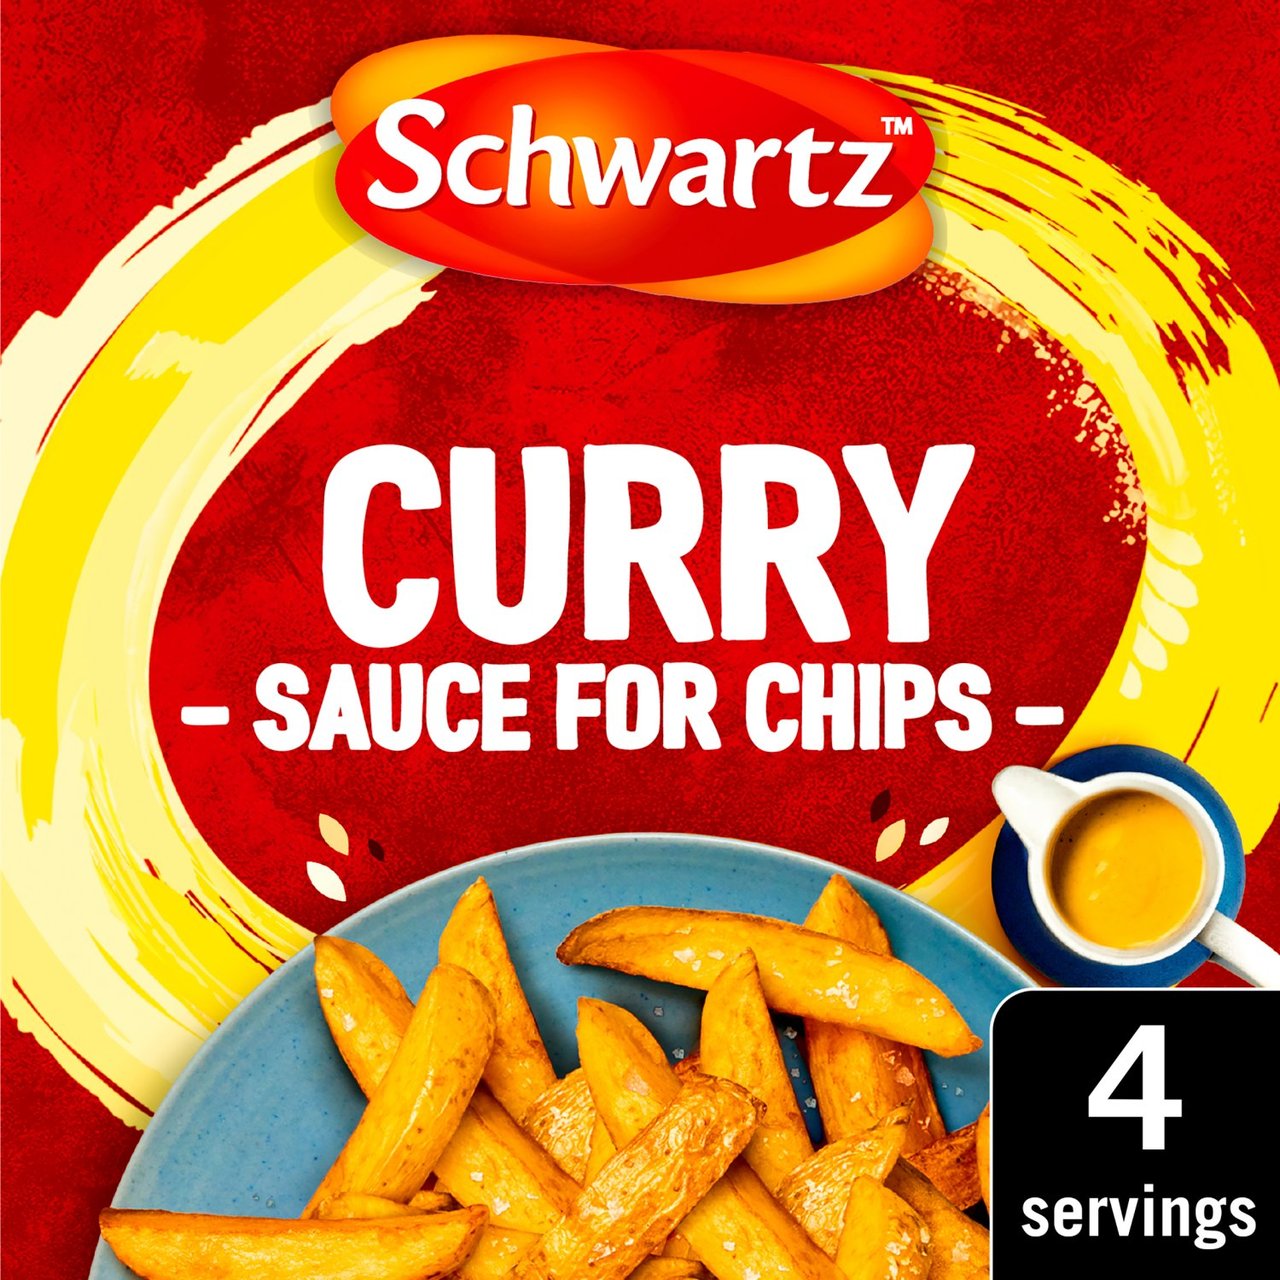 Schwartz Curry Sauce for Chips Mix